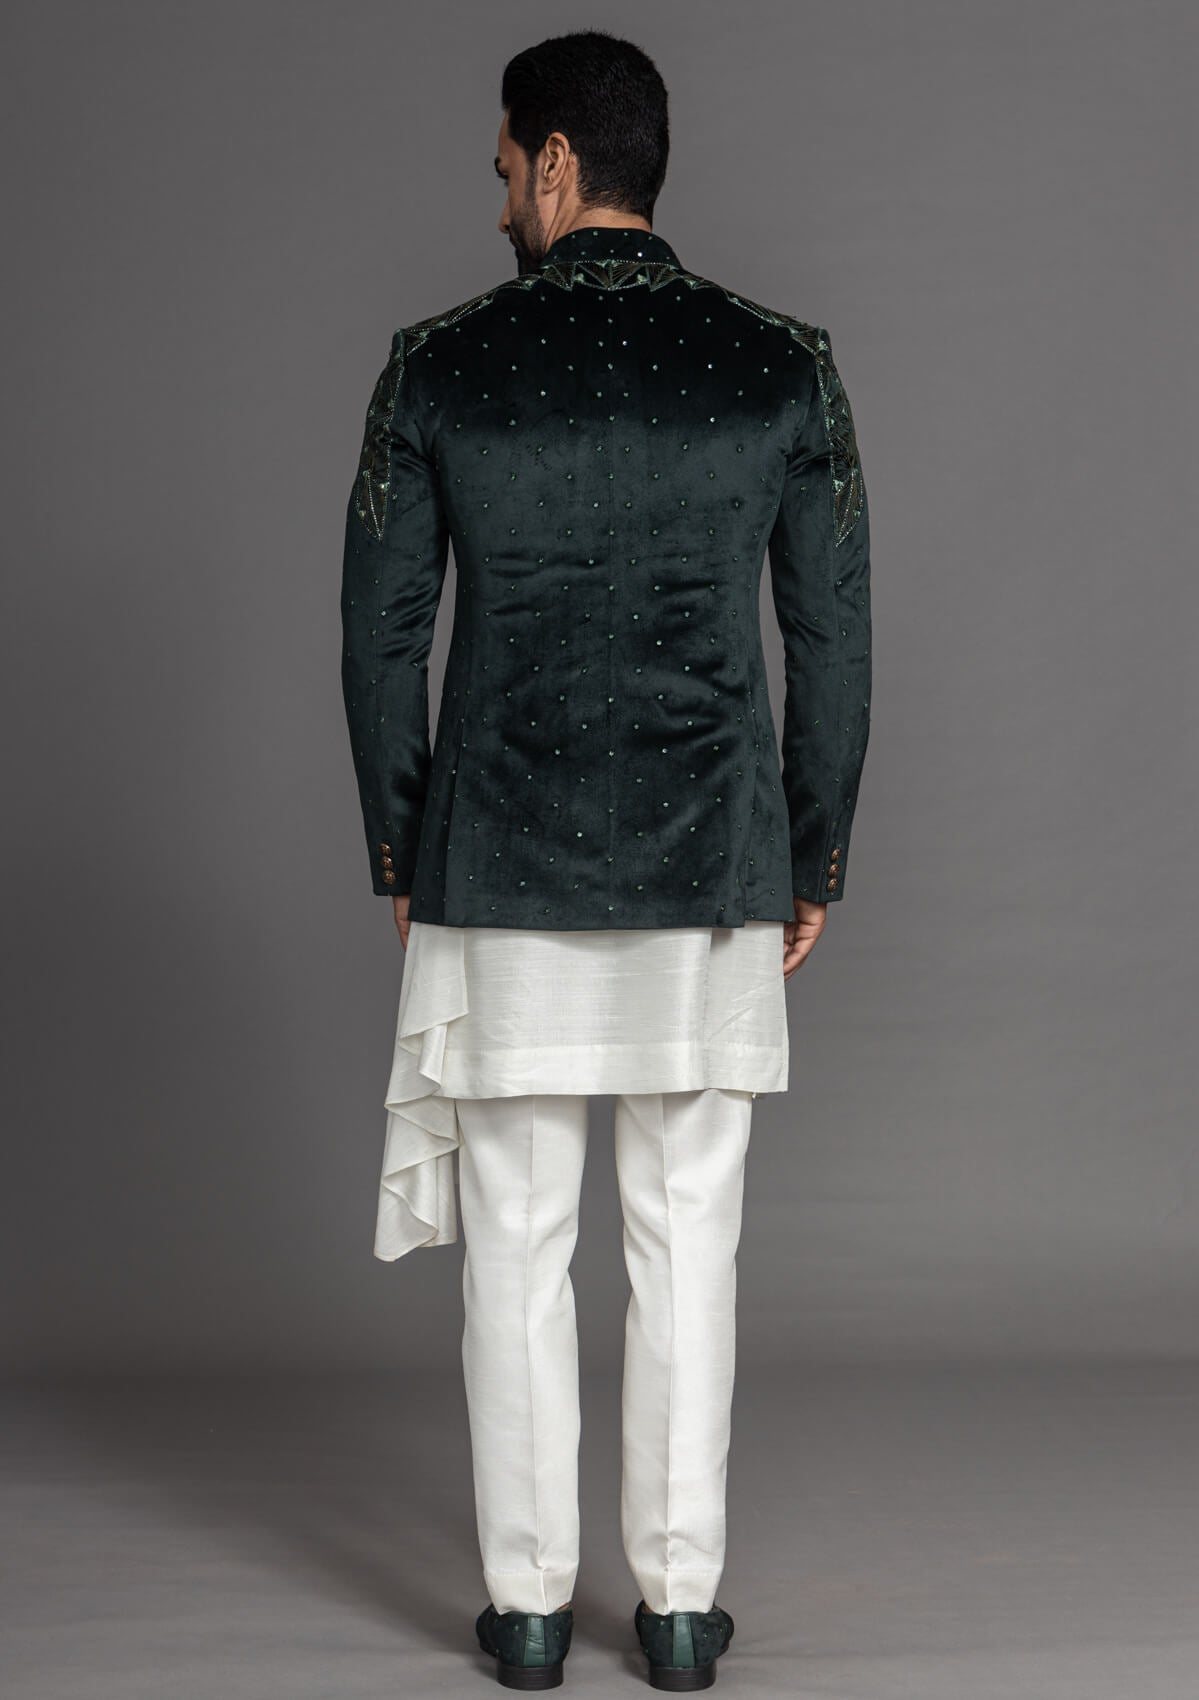 Stylish Bandhgala suit showcasing a fusion of traditional and contemporary elements